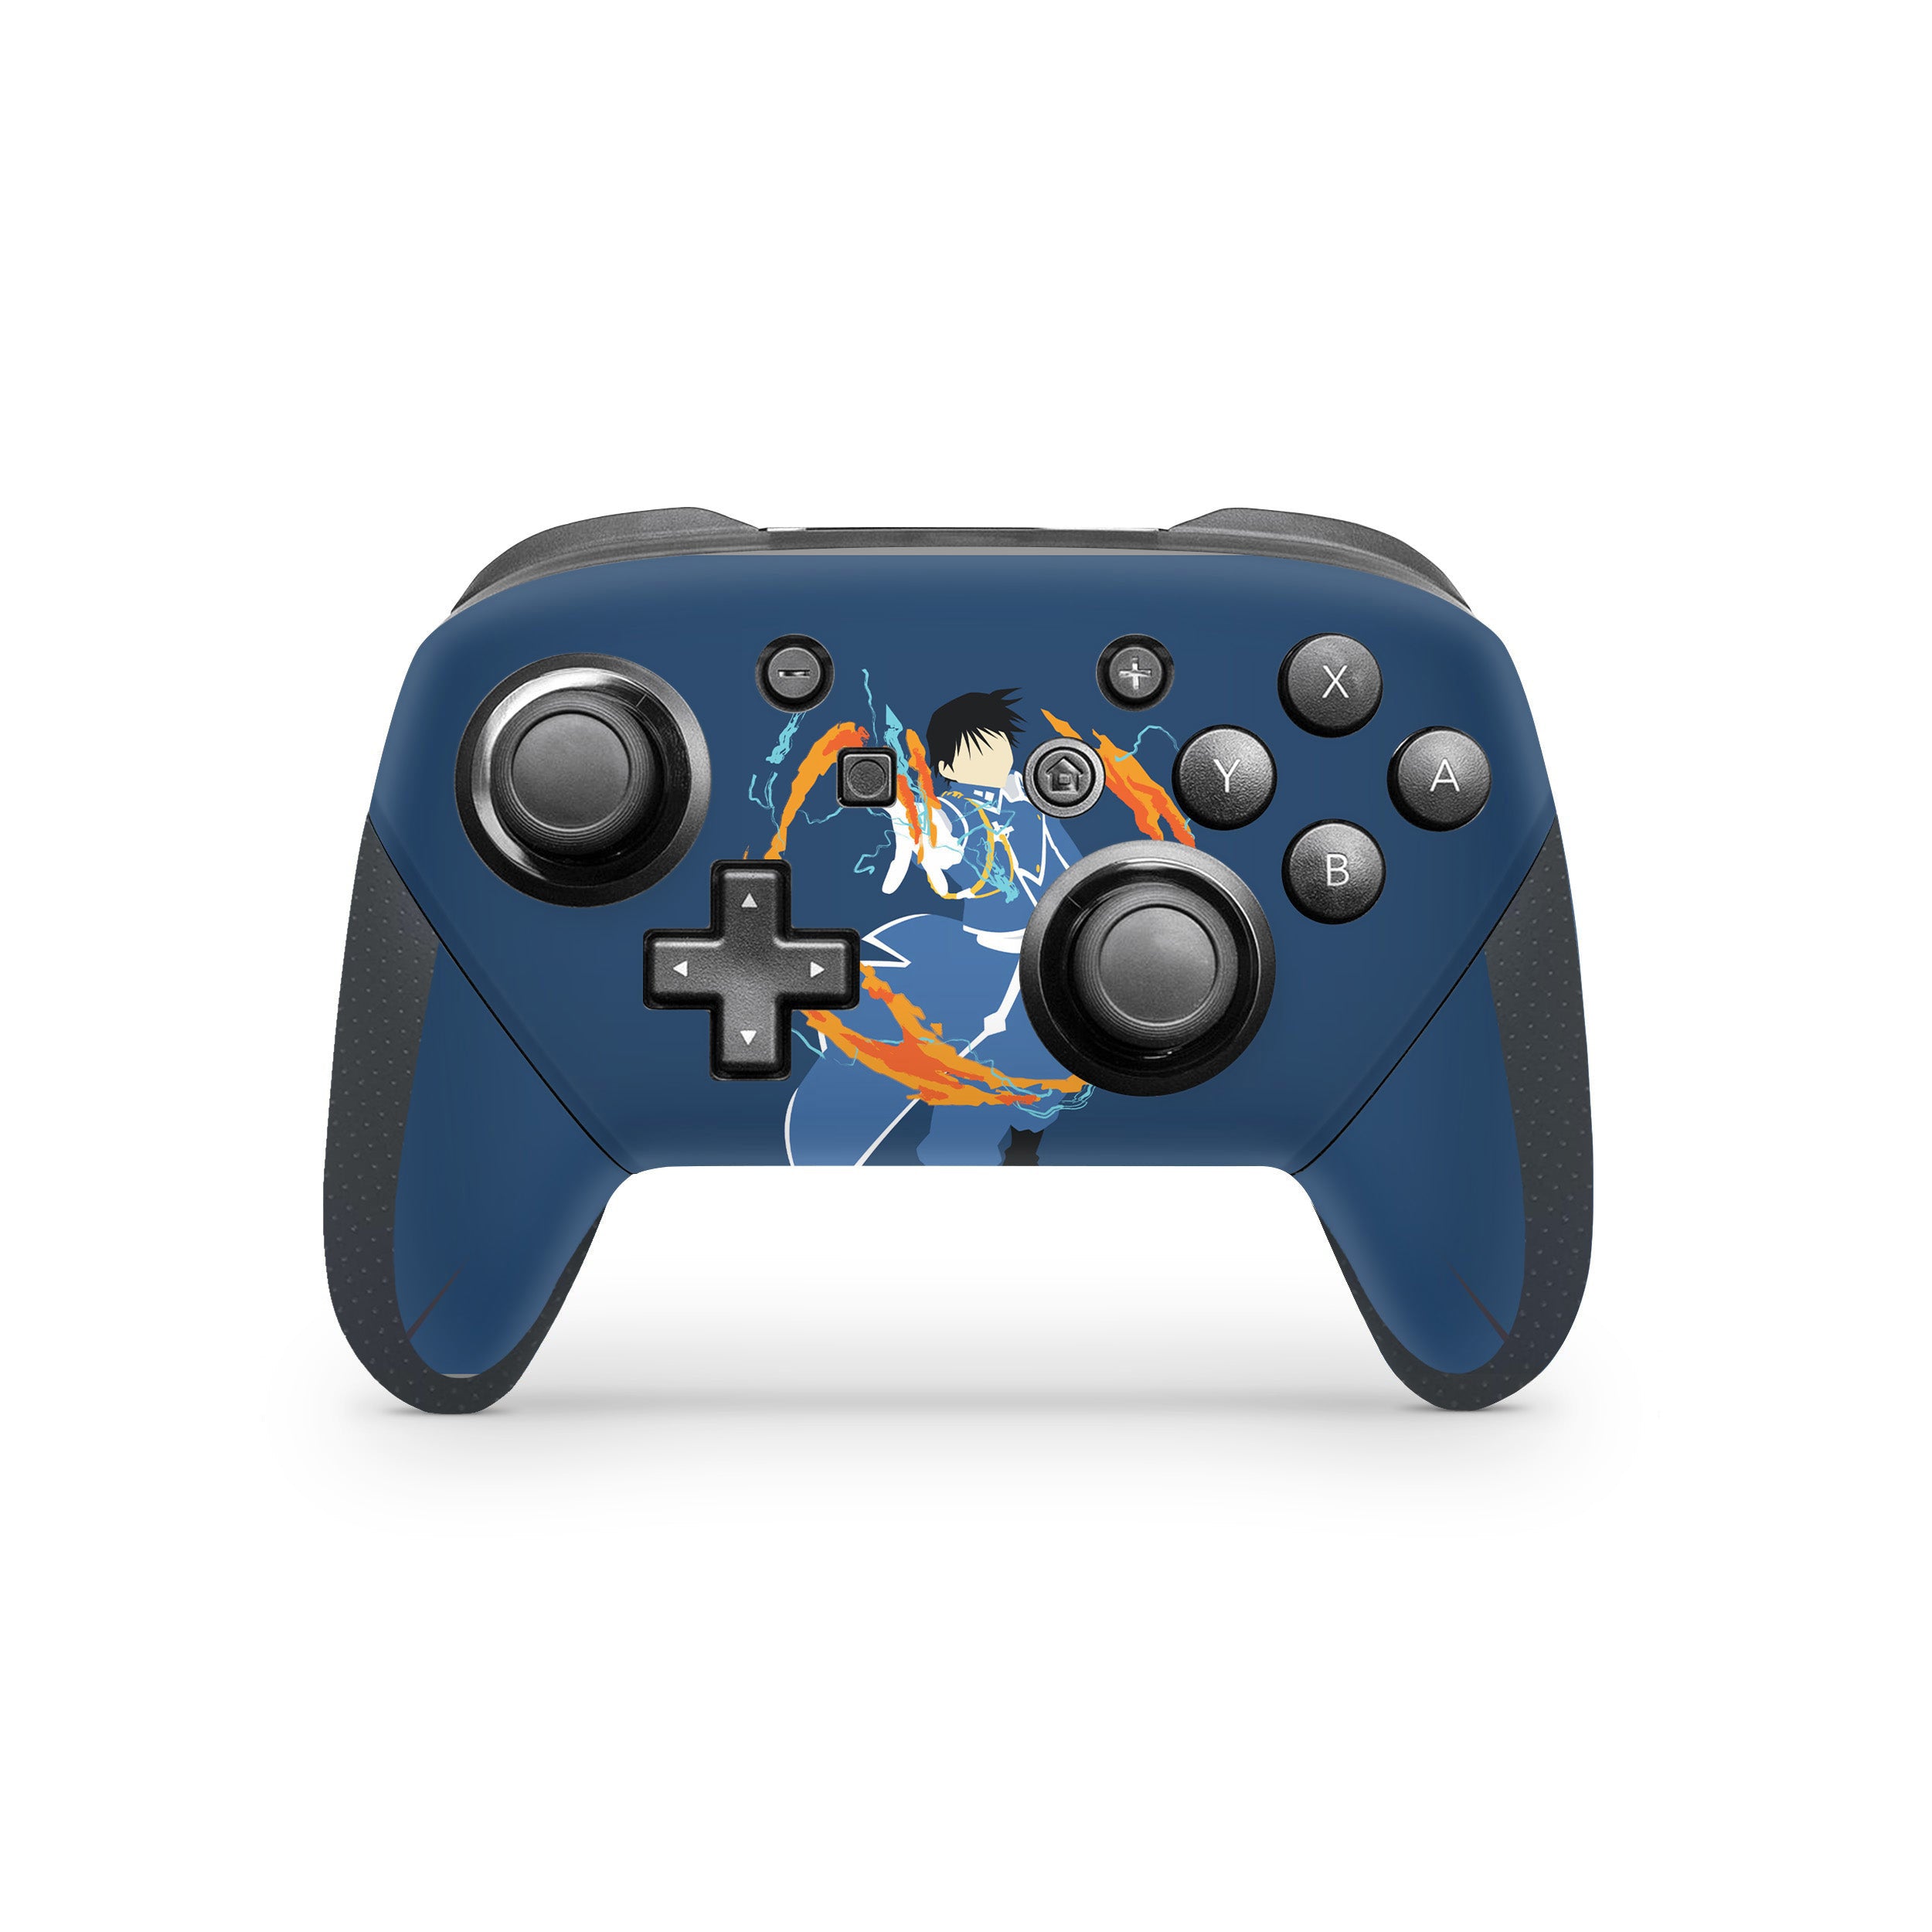 A video game skin featuring a Fullmetal Alchemist Roy Mustang design for the Switch Pro Controller.